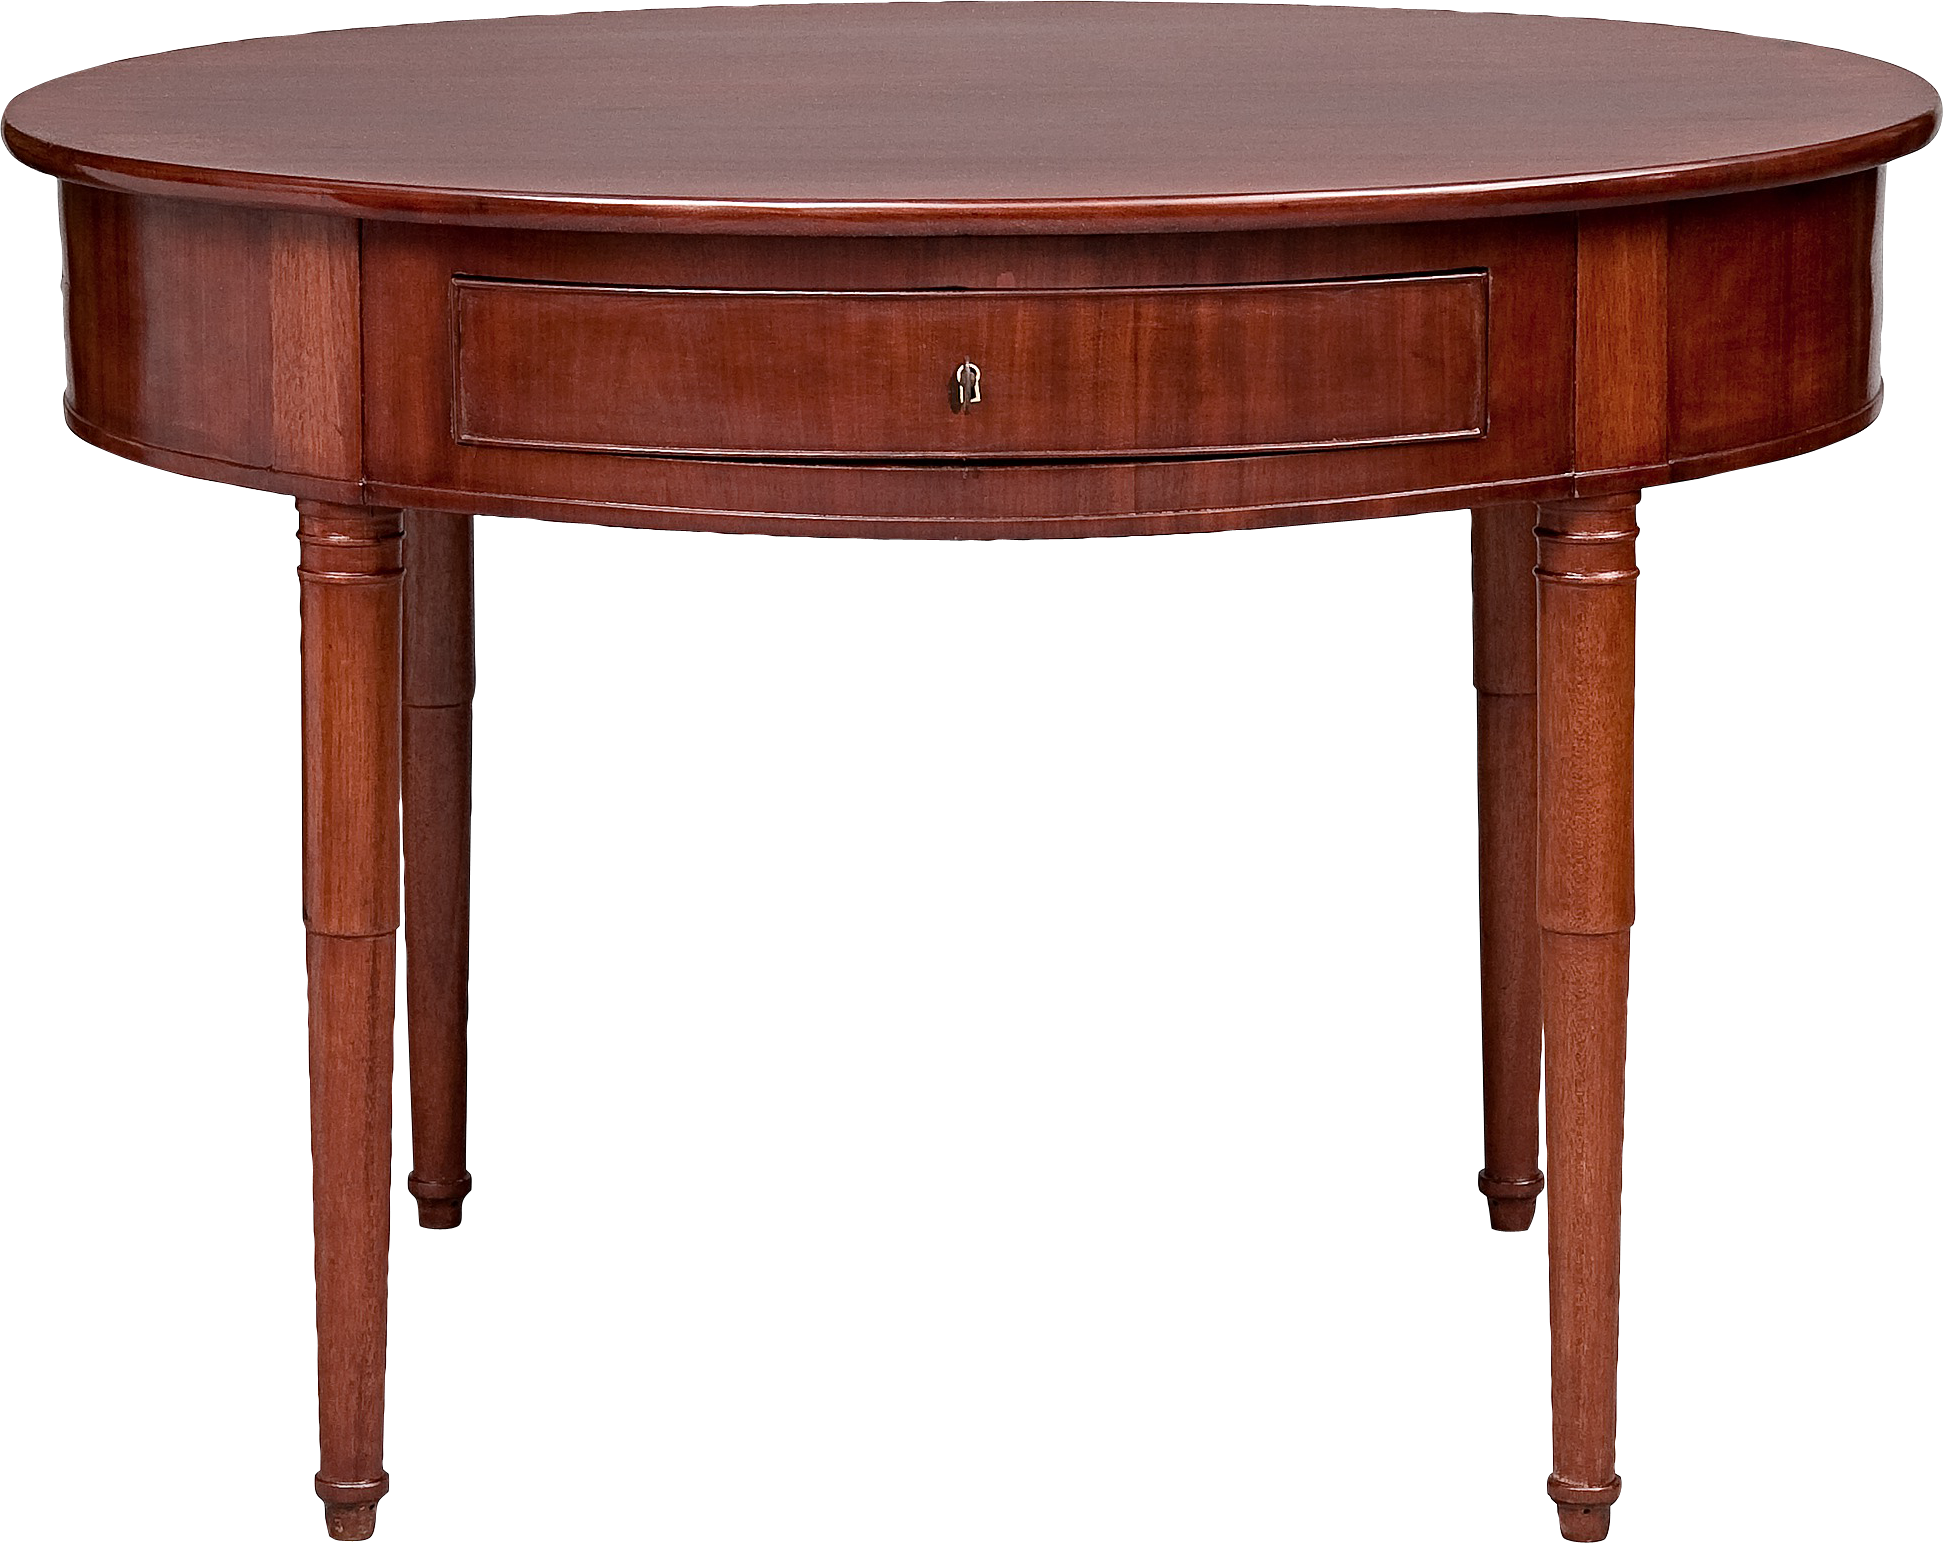 Table Png Image Transparent Image Download, Size: 1943x1543px Pertaining To Transparent Side Tables For Living Rooms (View 18 of 20)